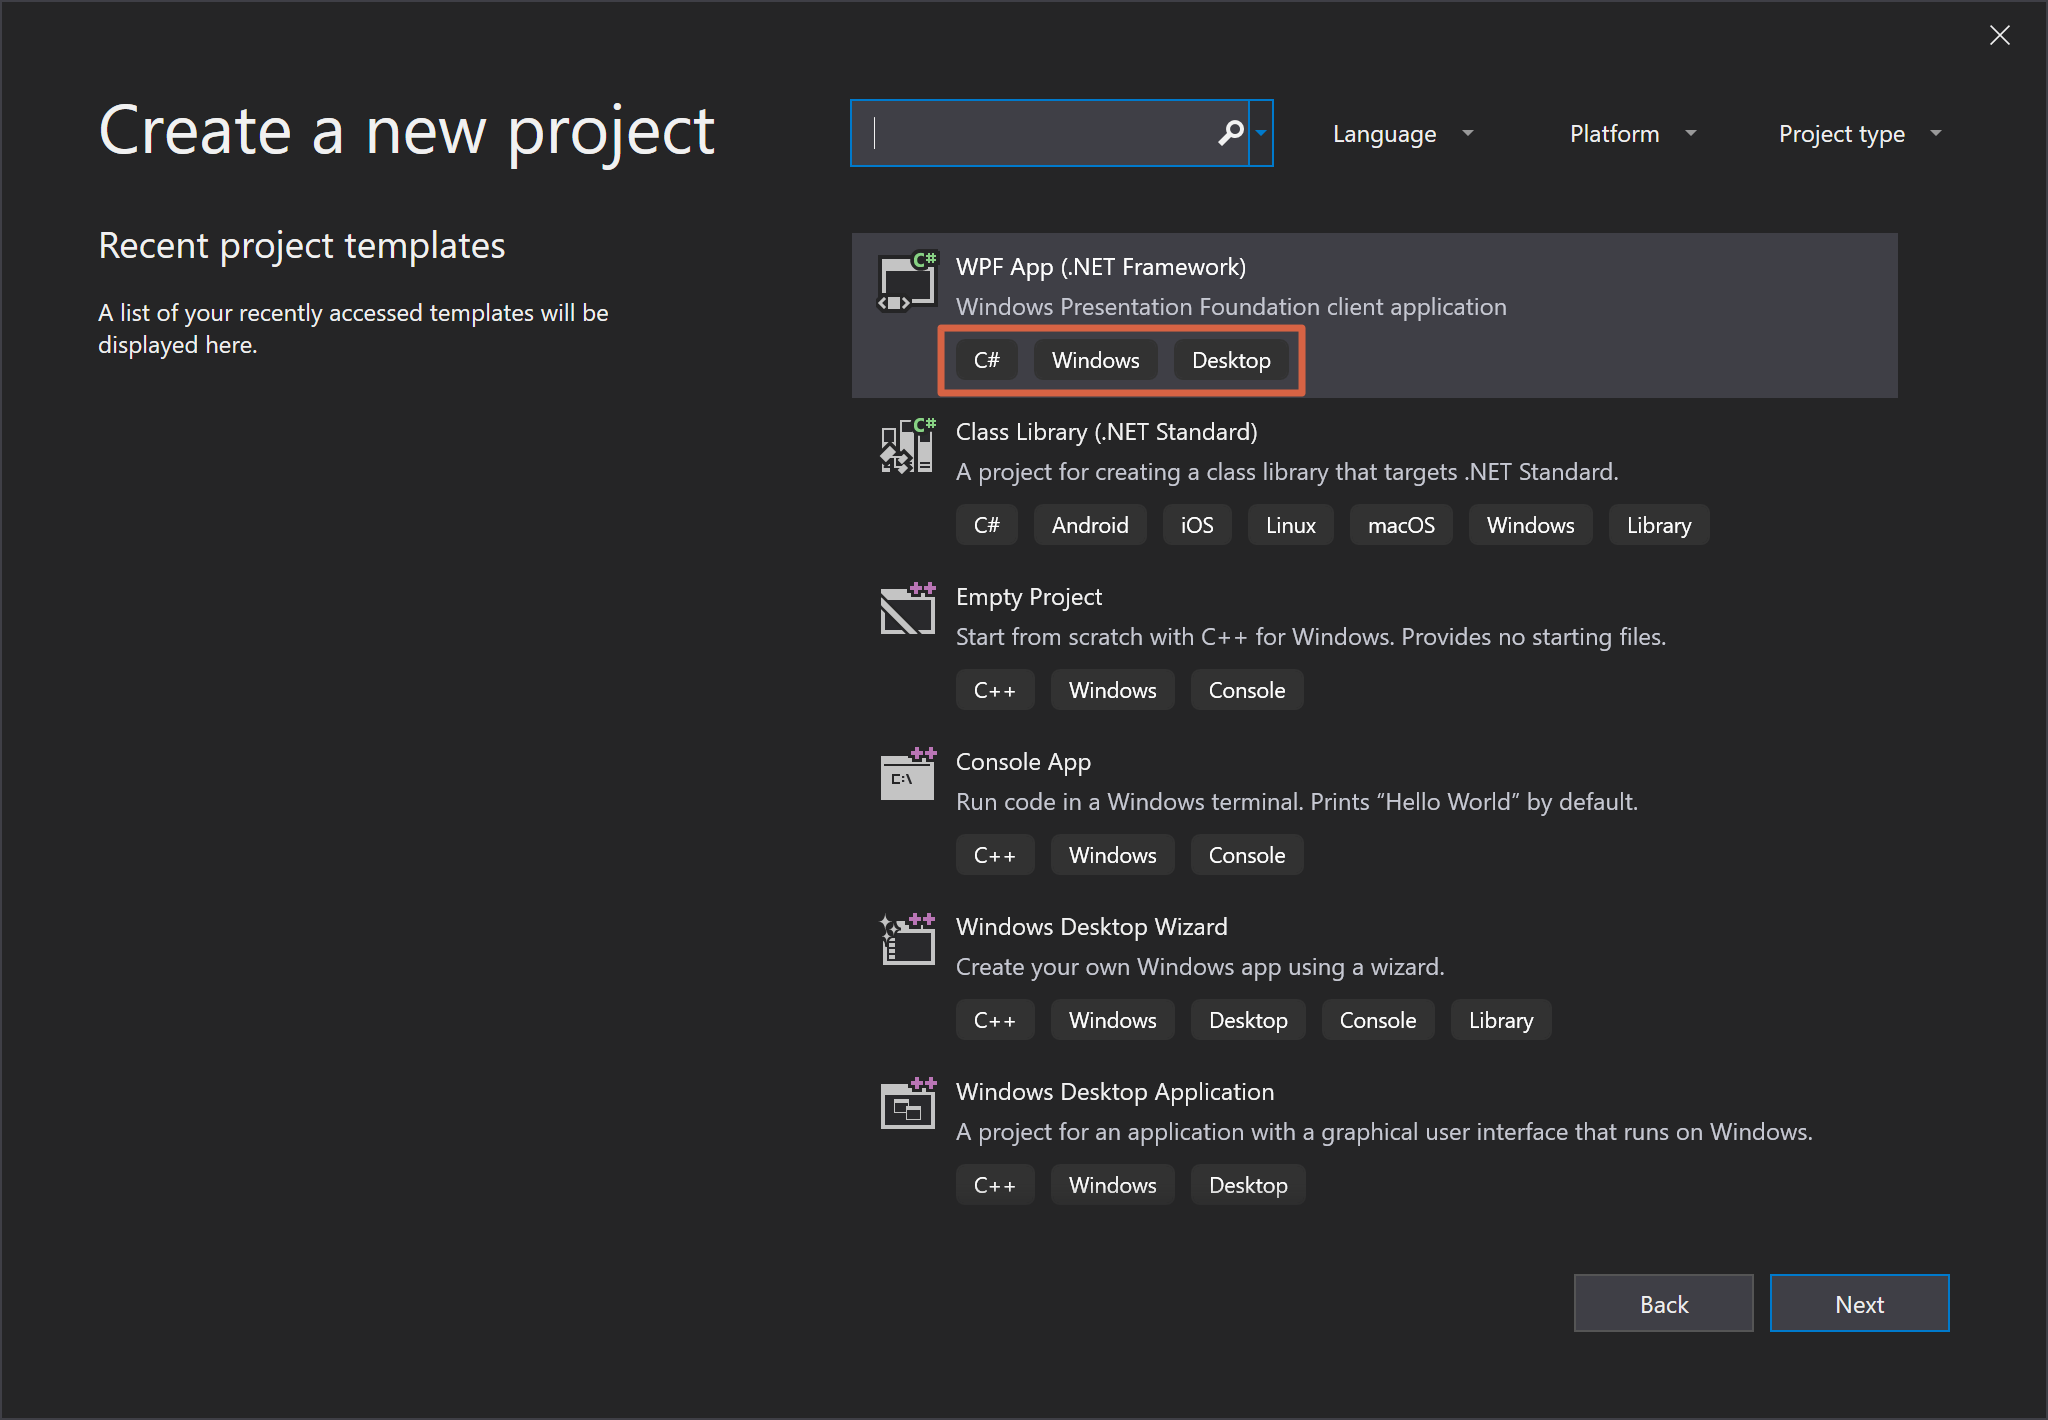 Build Visual Studio templates with tags, for efficient user search and  grouping - Visual Studio Blog